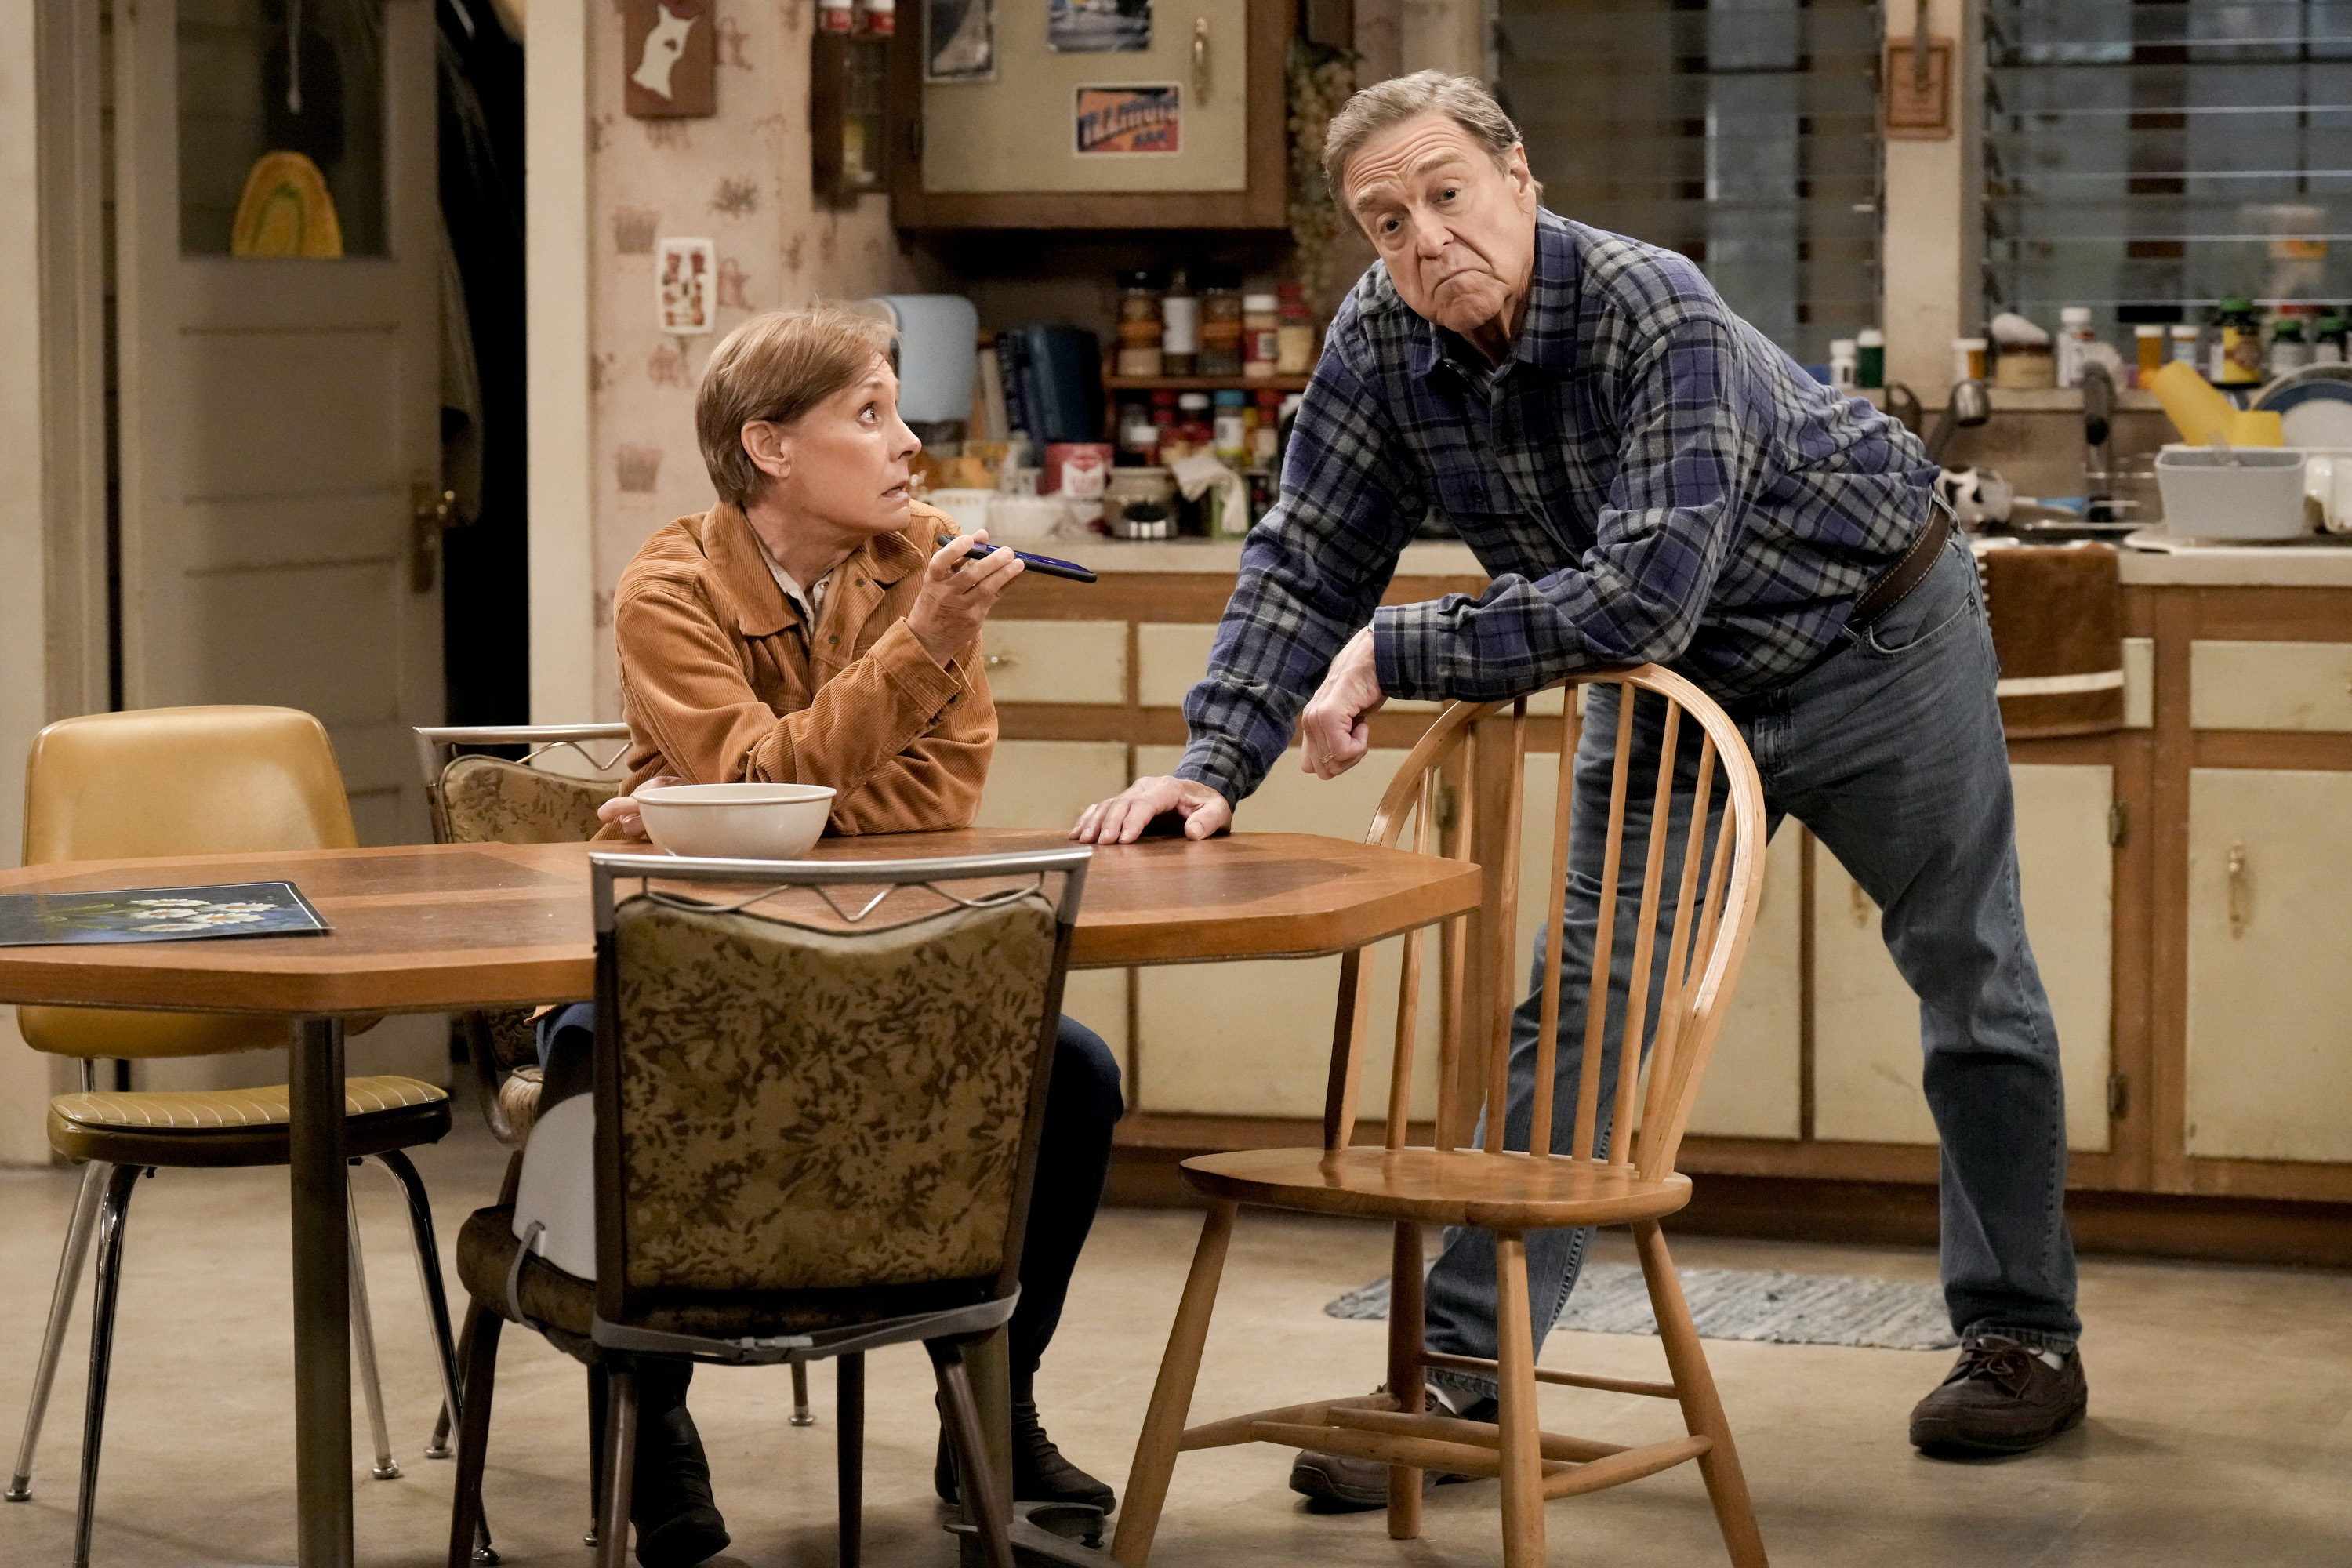 Laurie Metcalf and John Goodman on a Season Four Episode of ABC's "The Conners" in 2022. | Source: Getty Images